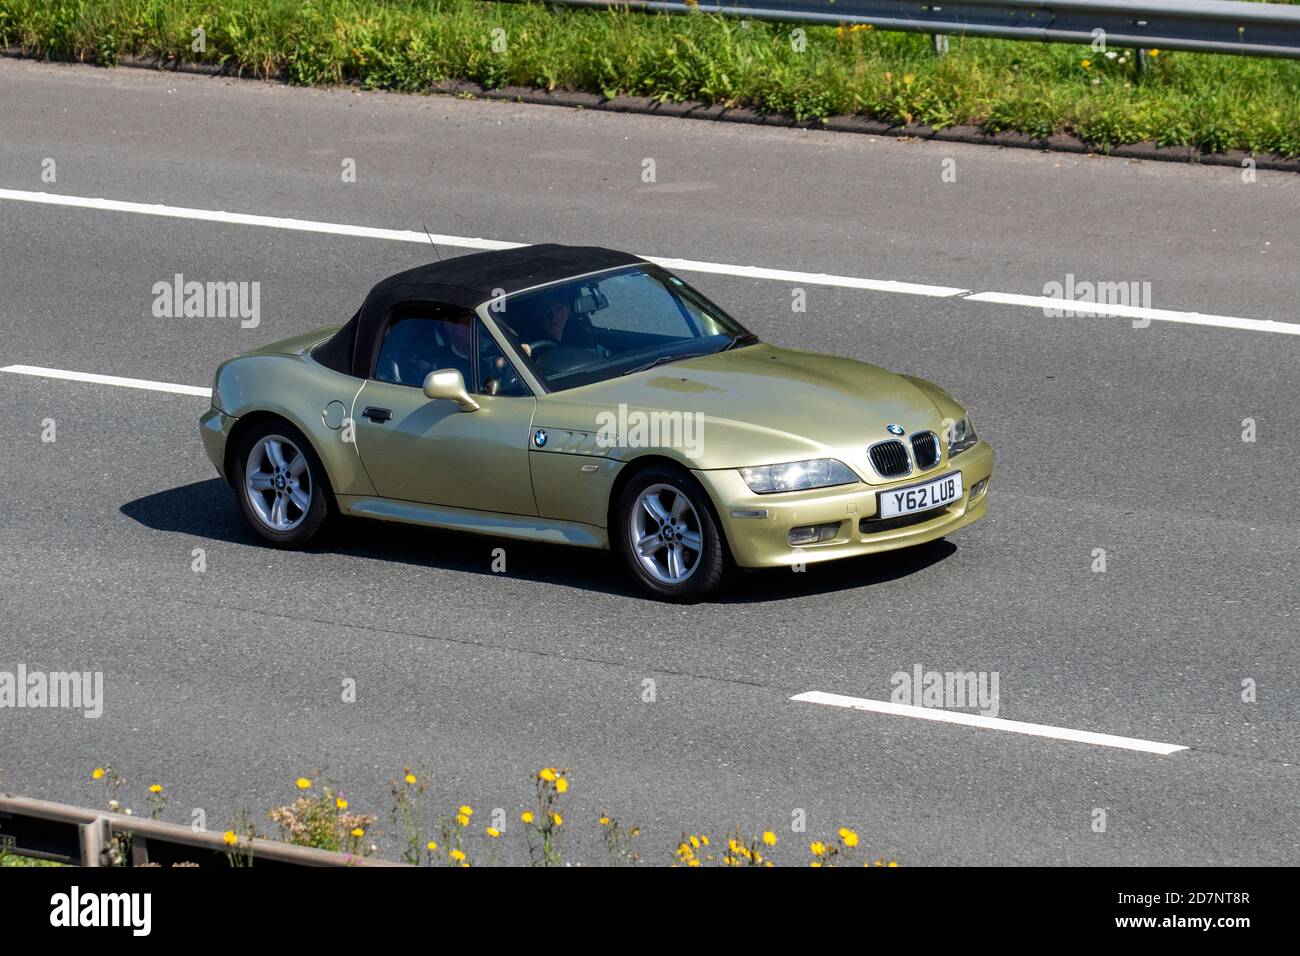 2001 green BMW Z3 sports car; Vehicular traffic, moving vehicles, cars, vehicle driving on UK roads, motors, motoring on the M6 motorway highway UK road network. Stock Photo